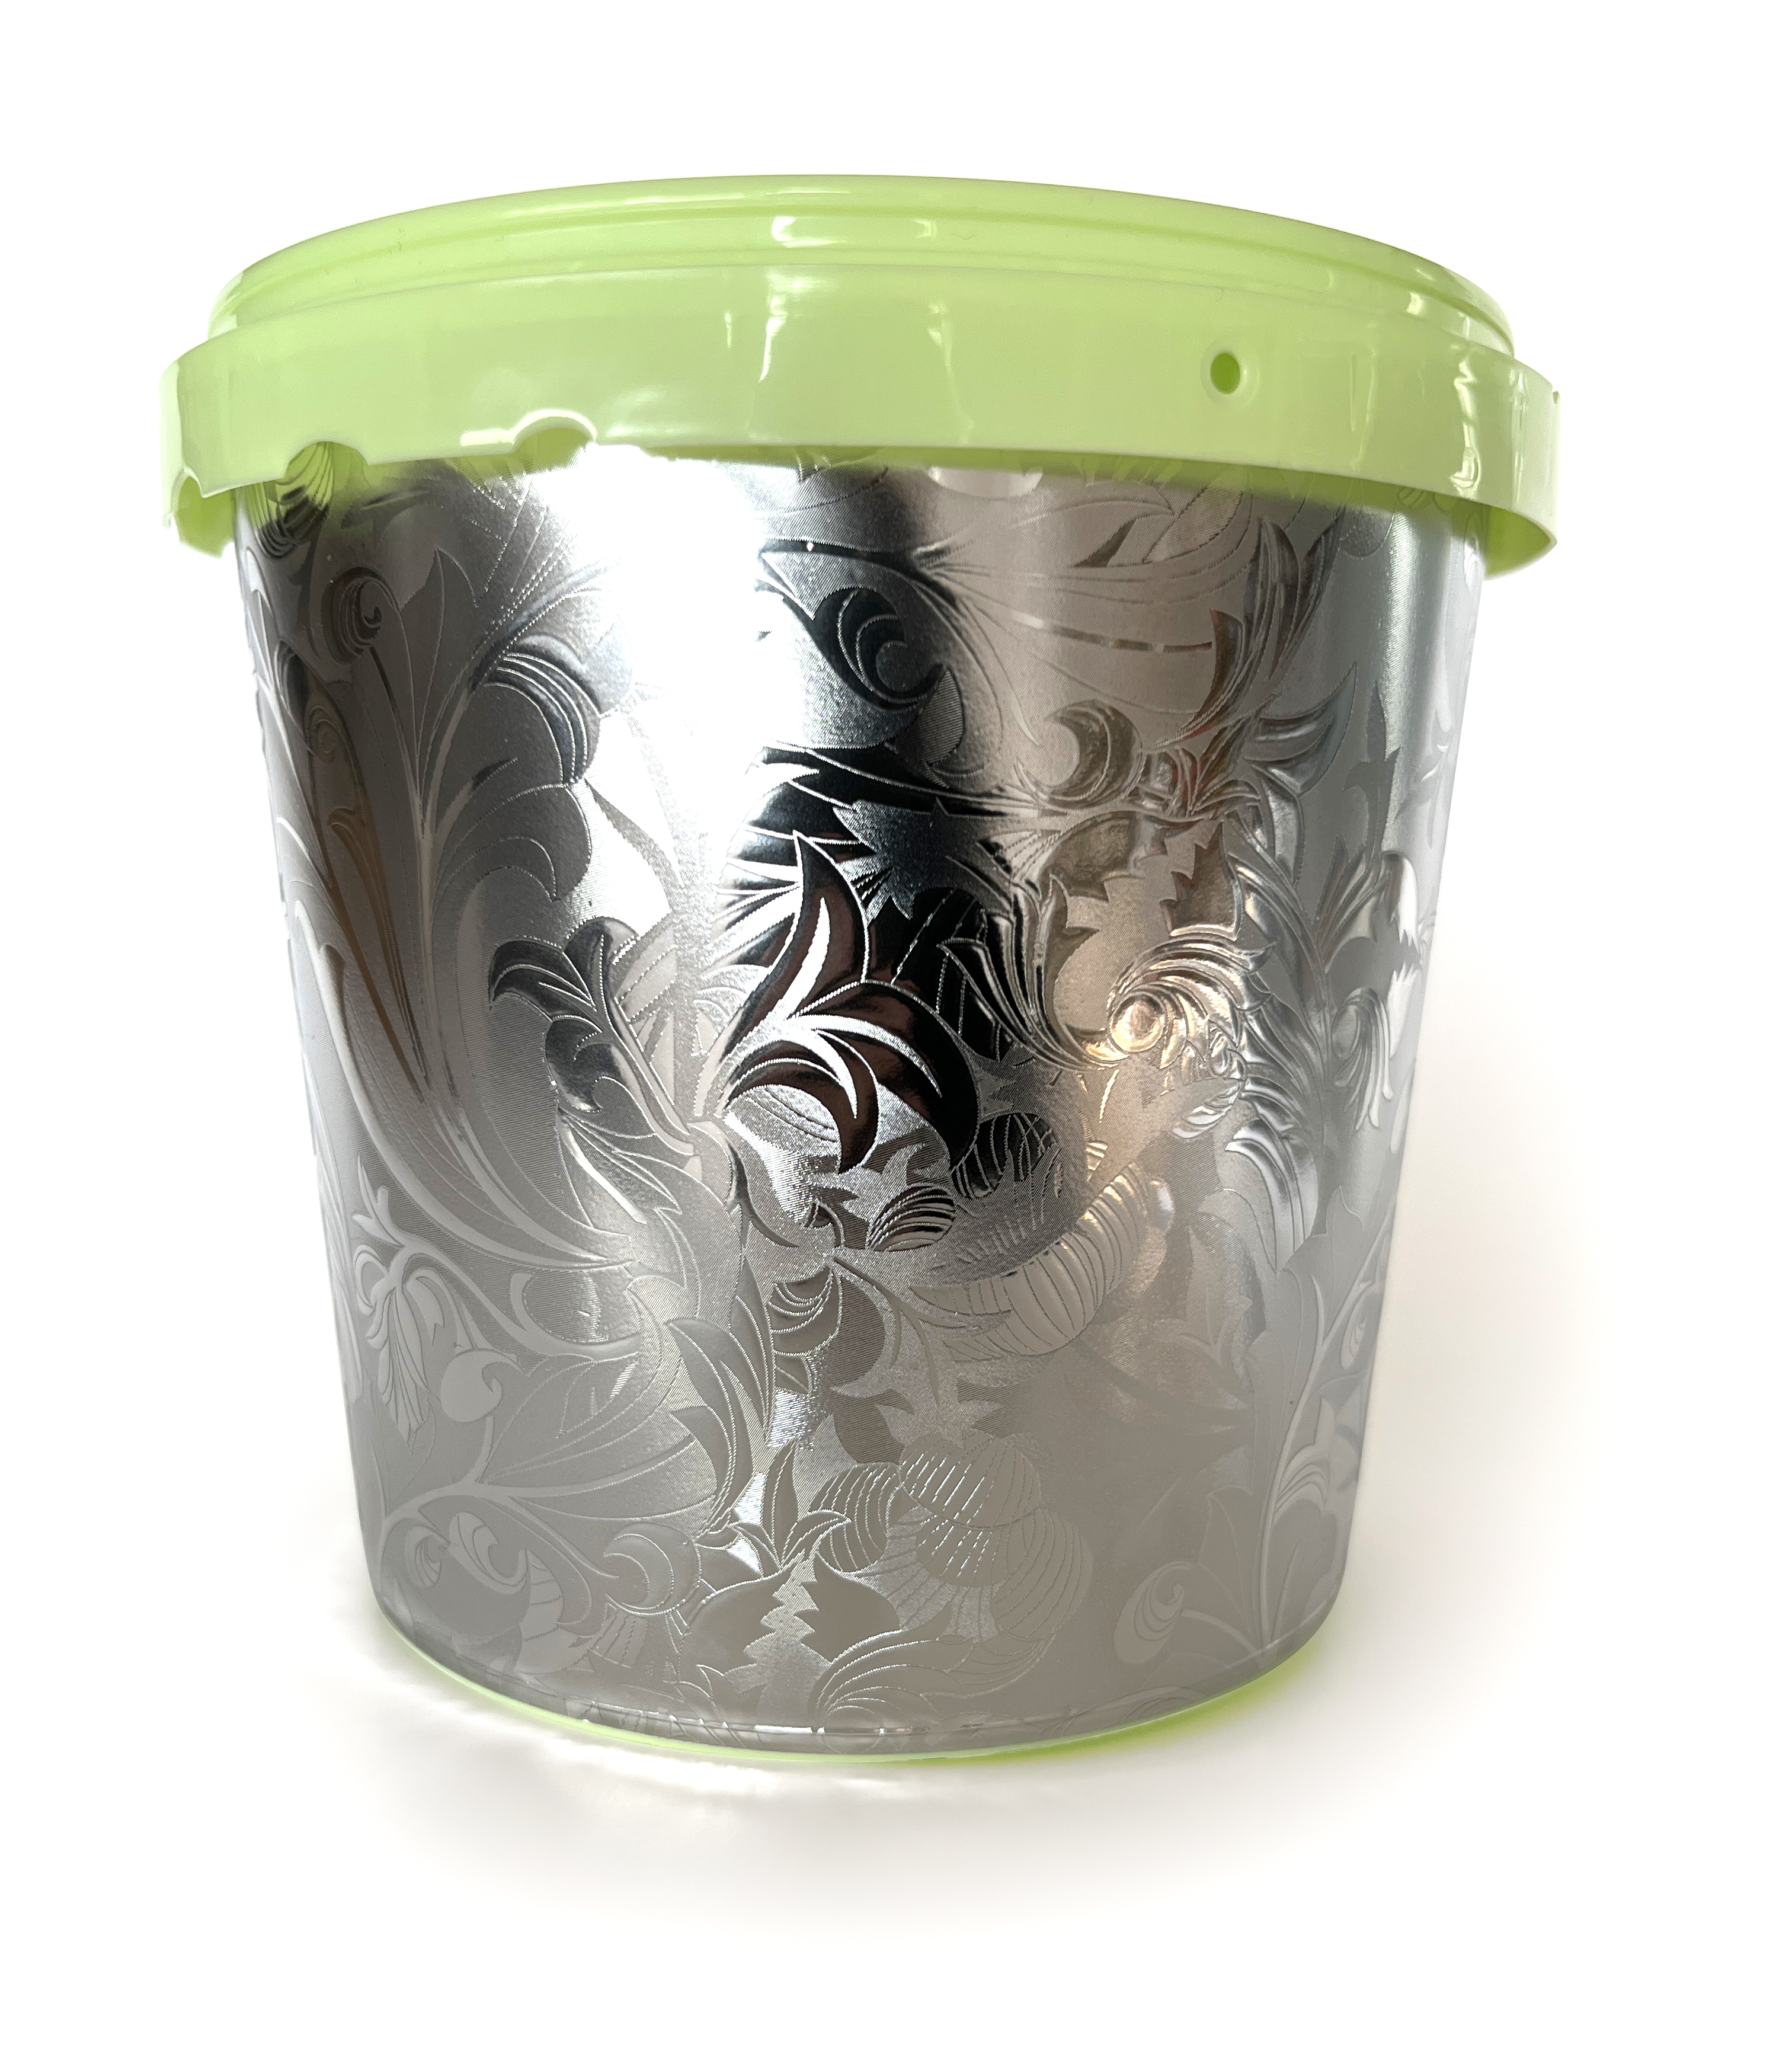 Metallic  Embossed  In Mold Labeling (IML)  For Container And Pail Industry